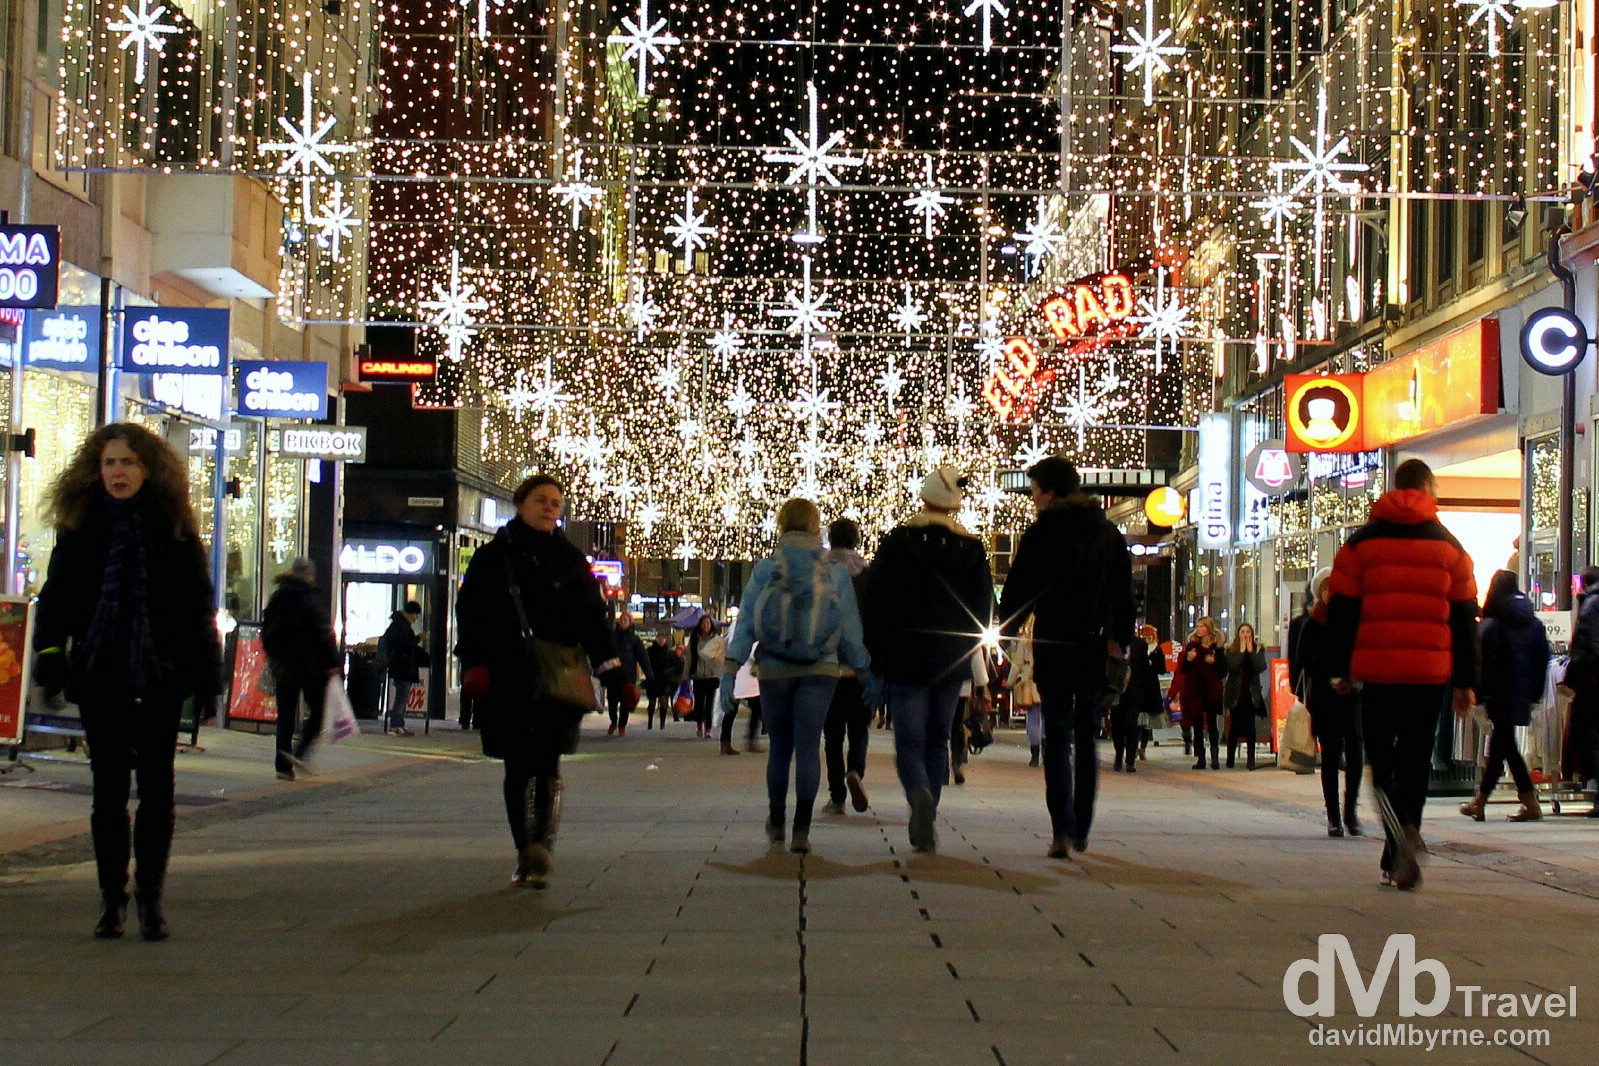 A festive look on Torggata, a pedestrianised street in central Oslo, Norway. November 29th 2012.